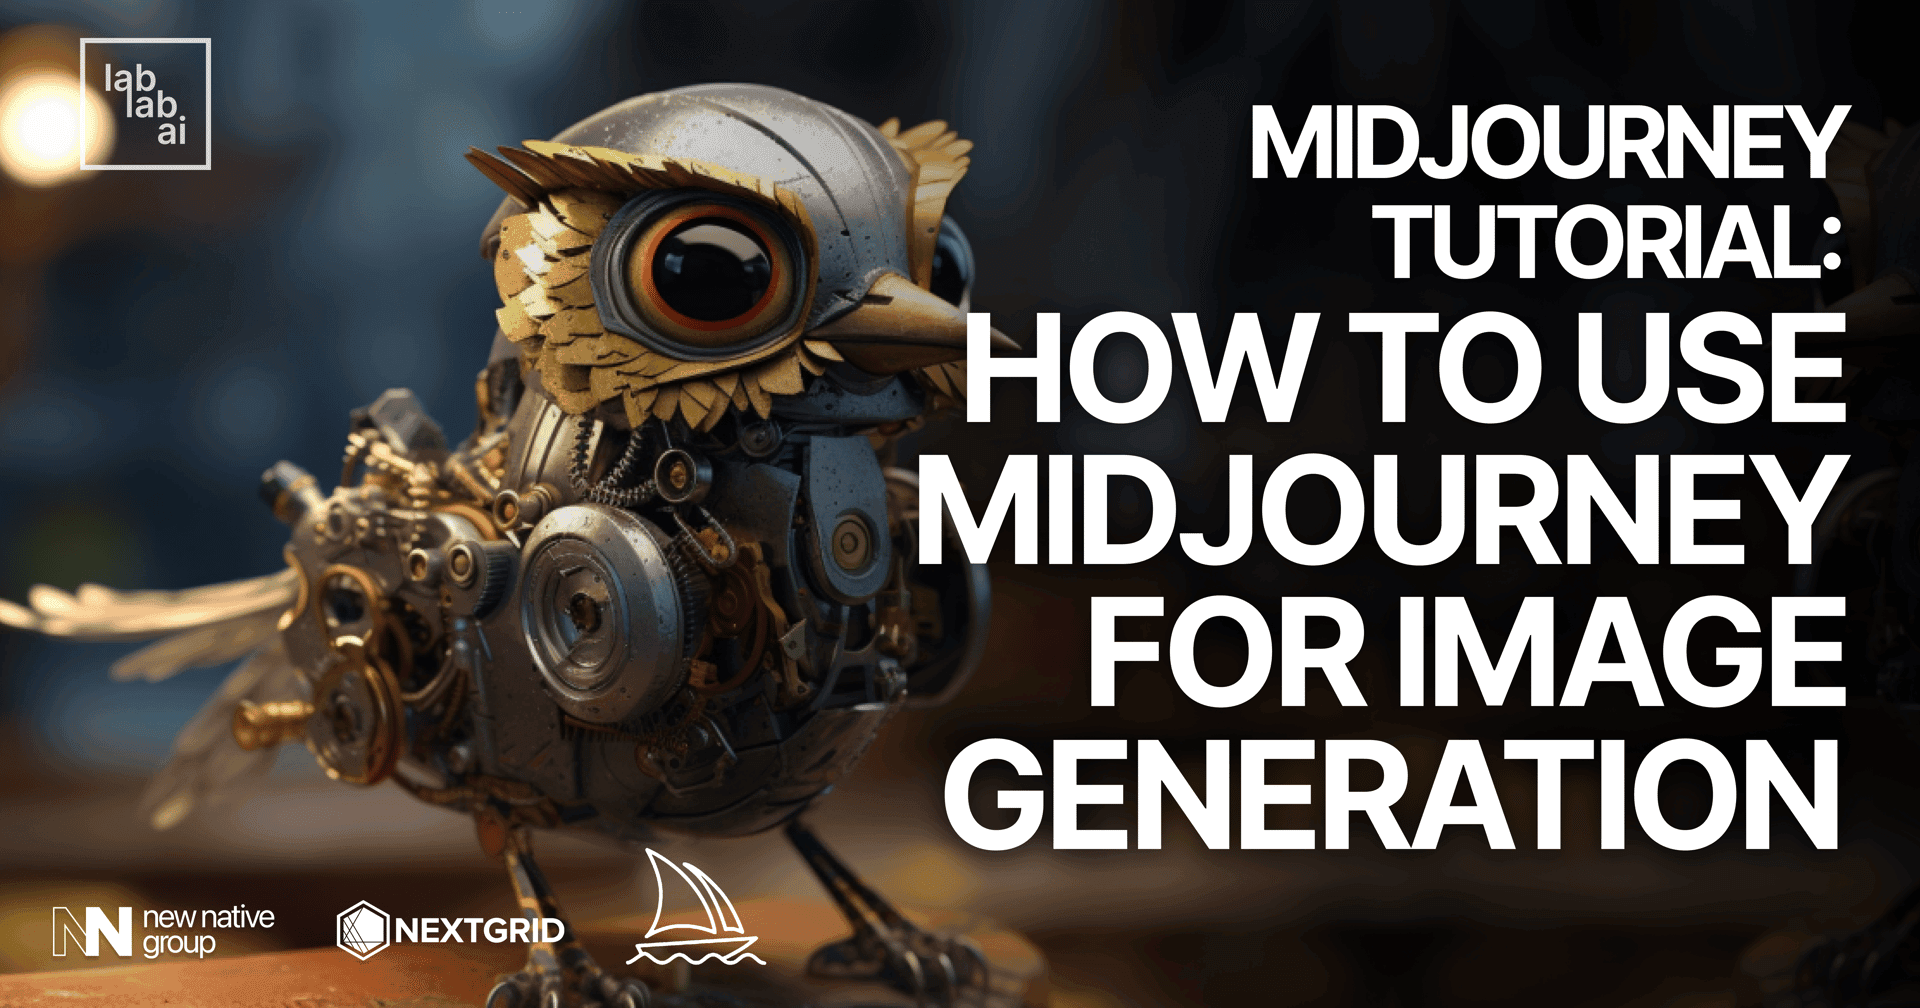 Midjourney tutorial: how to use Midjourney for image generation